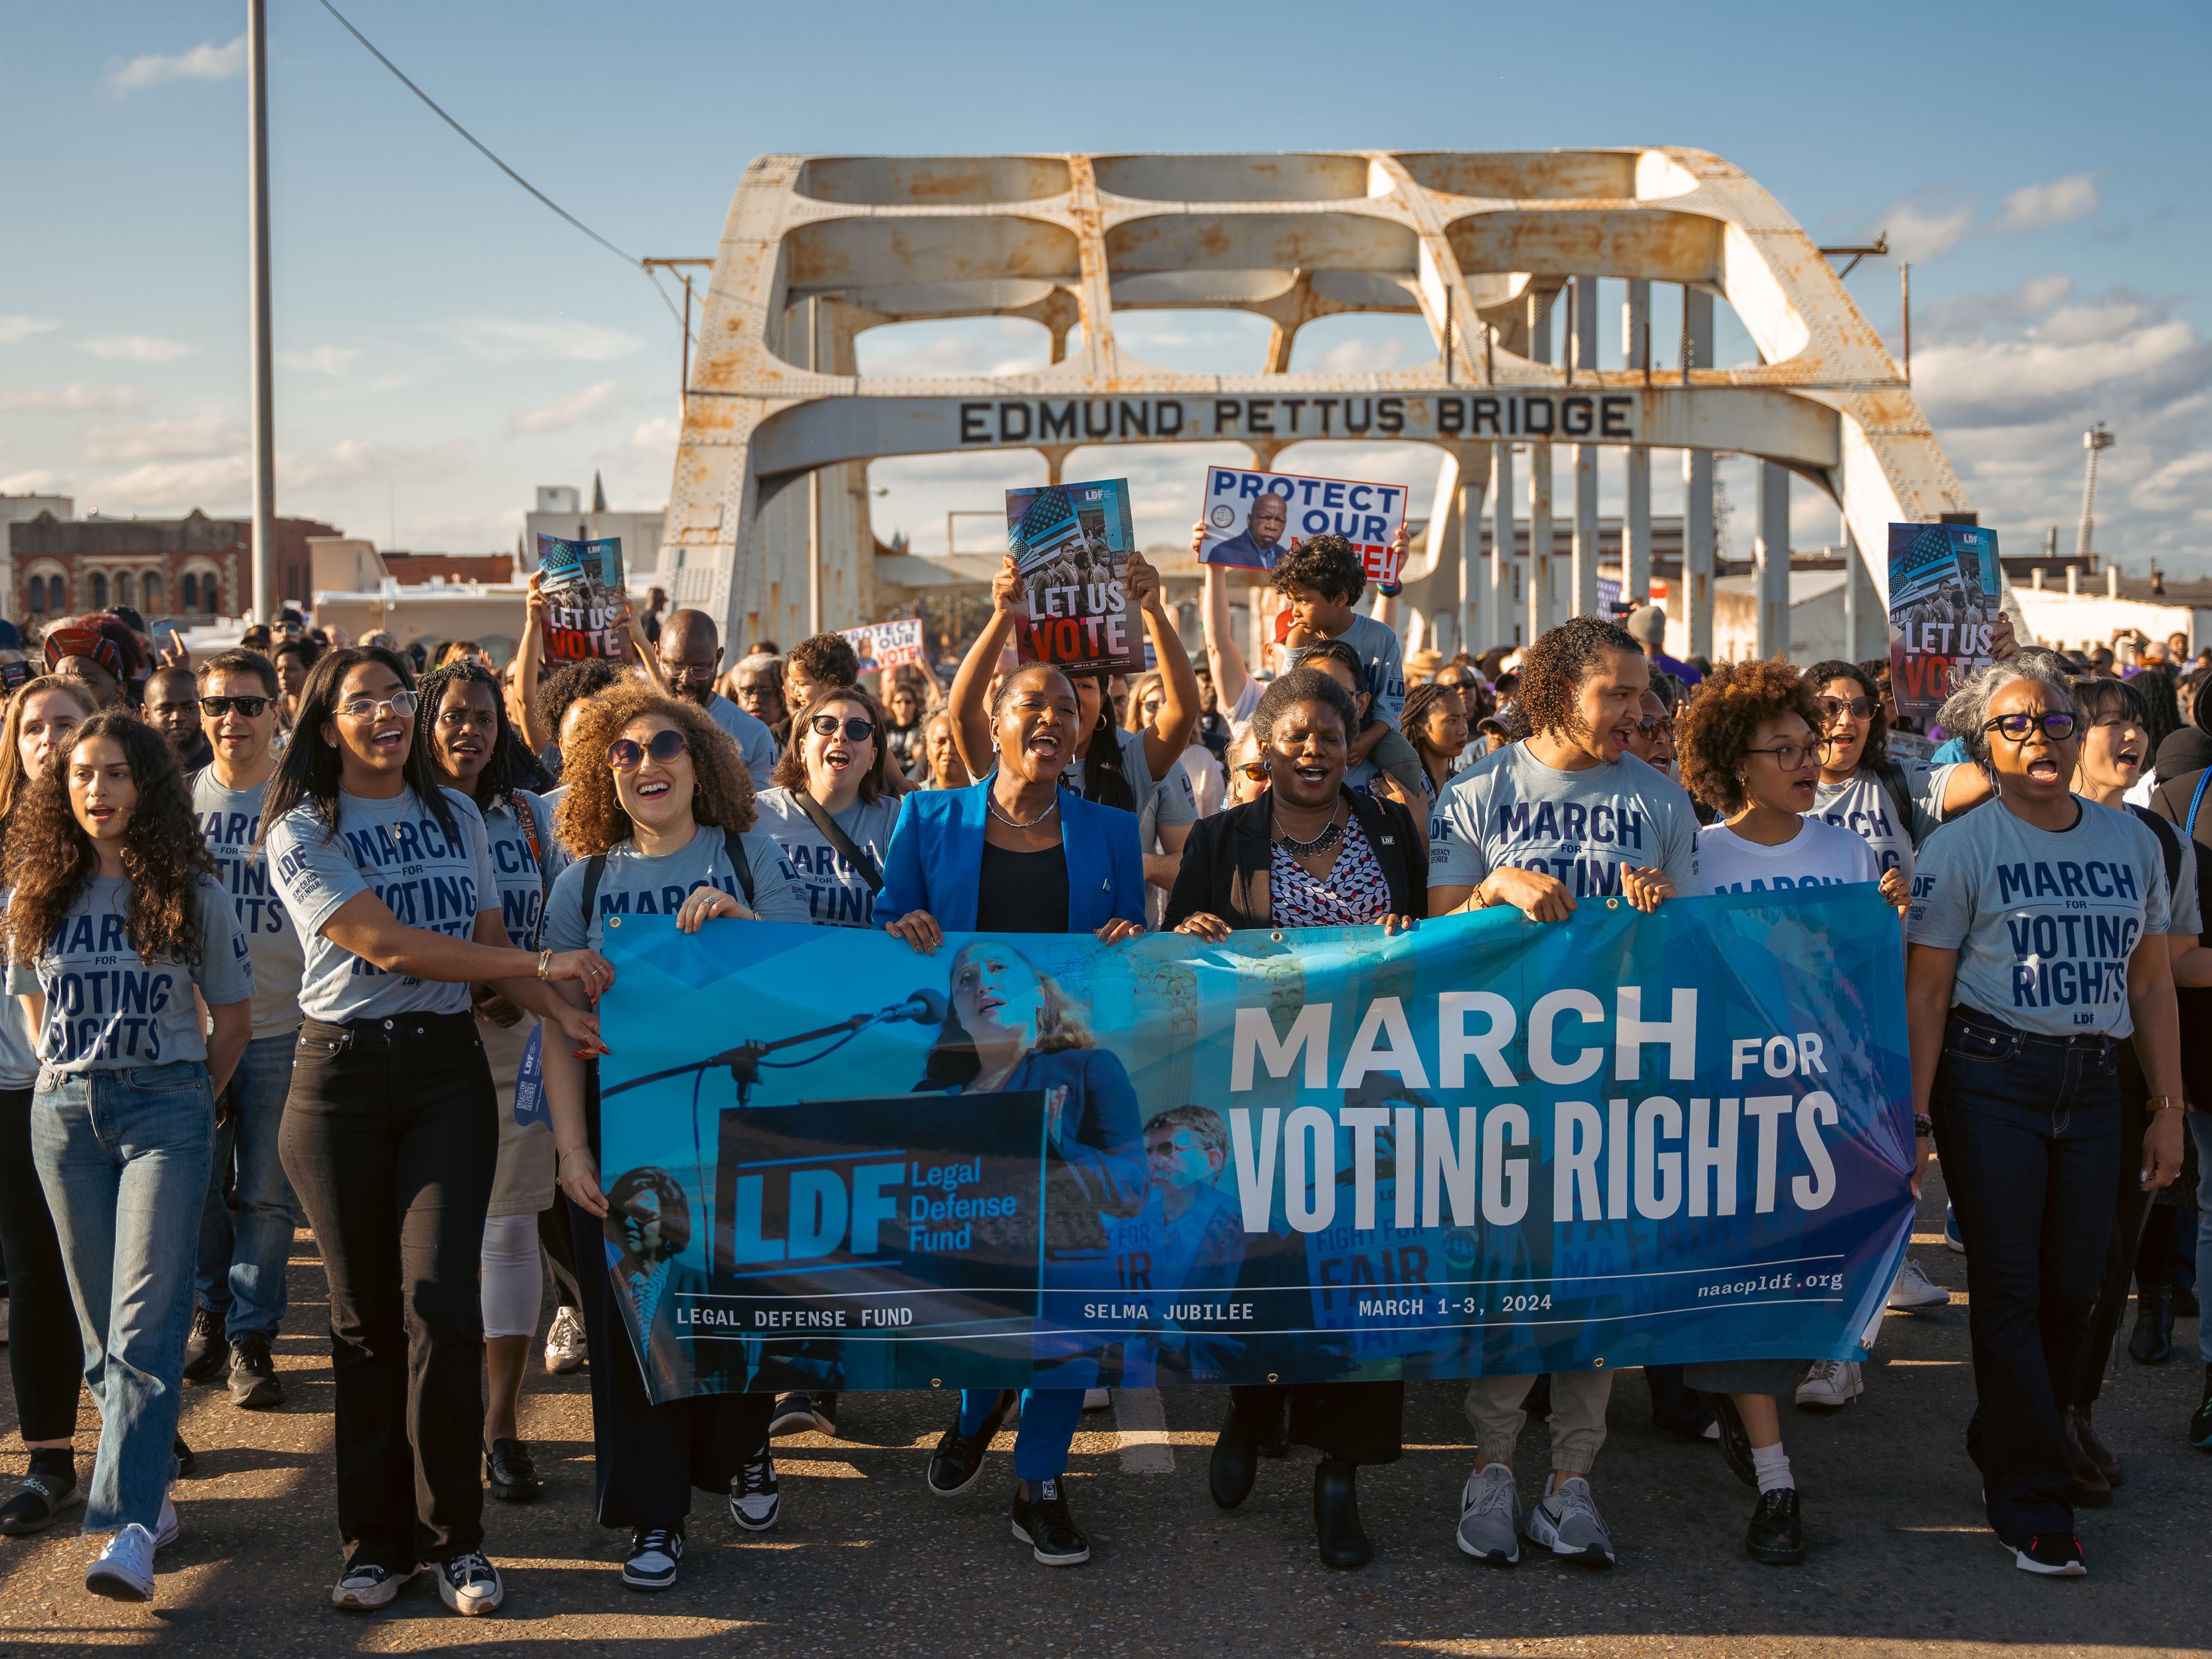 March for Voting Rights on the Edmund Pettis Bridge